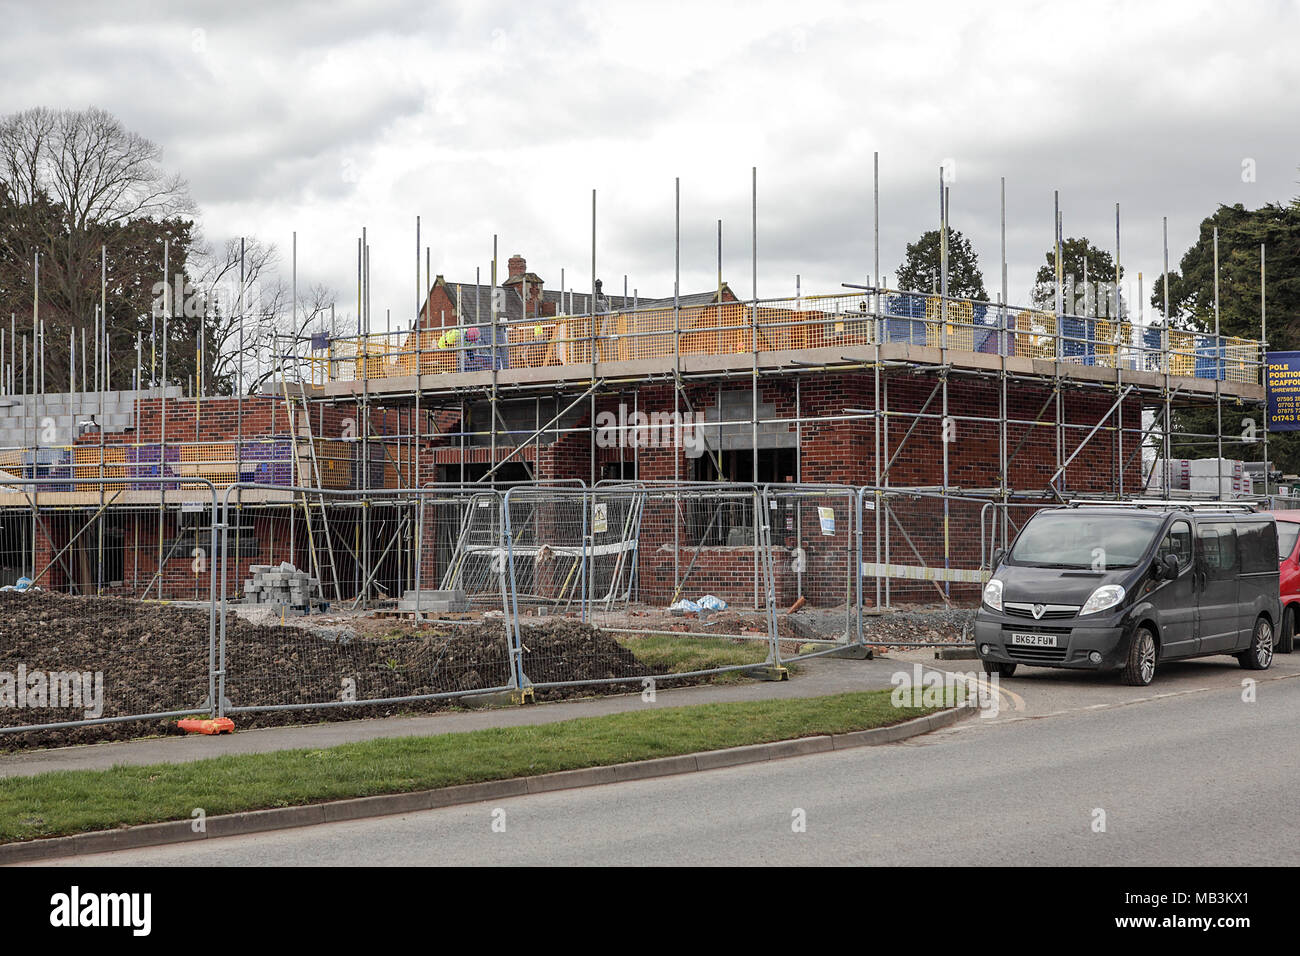 One of 20 images in this short set related to various retail, private and NHS properties in the Shrewsbury area. House building project in Shrewsbury. Stock Photo